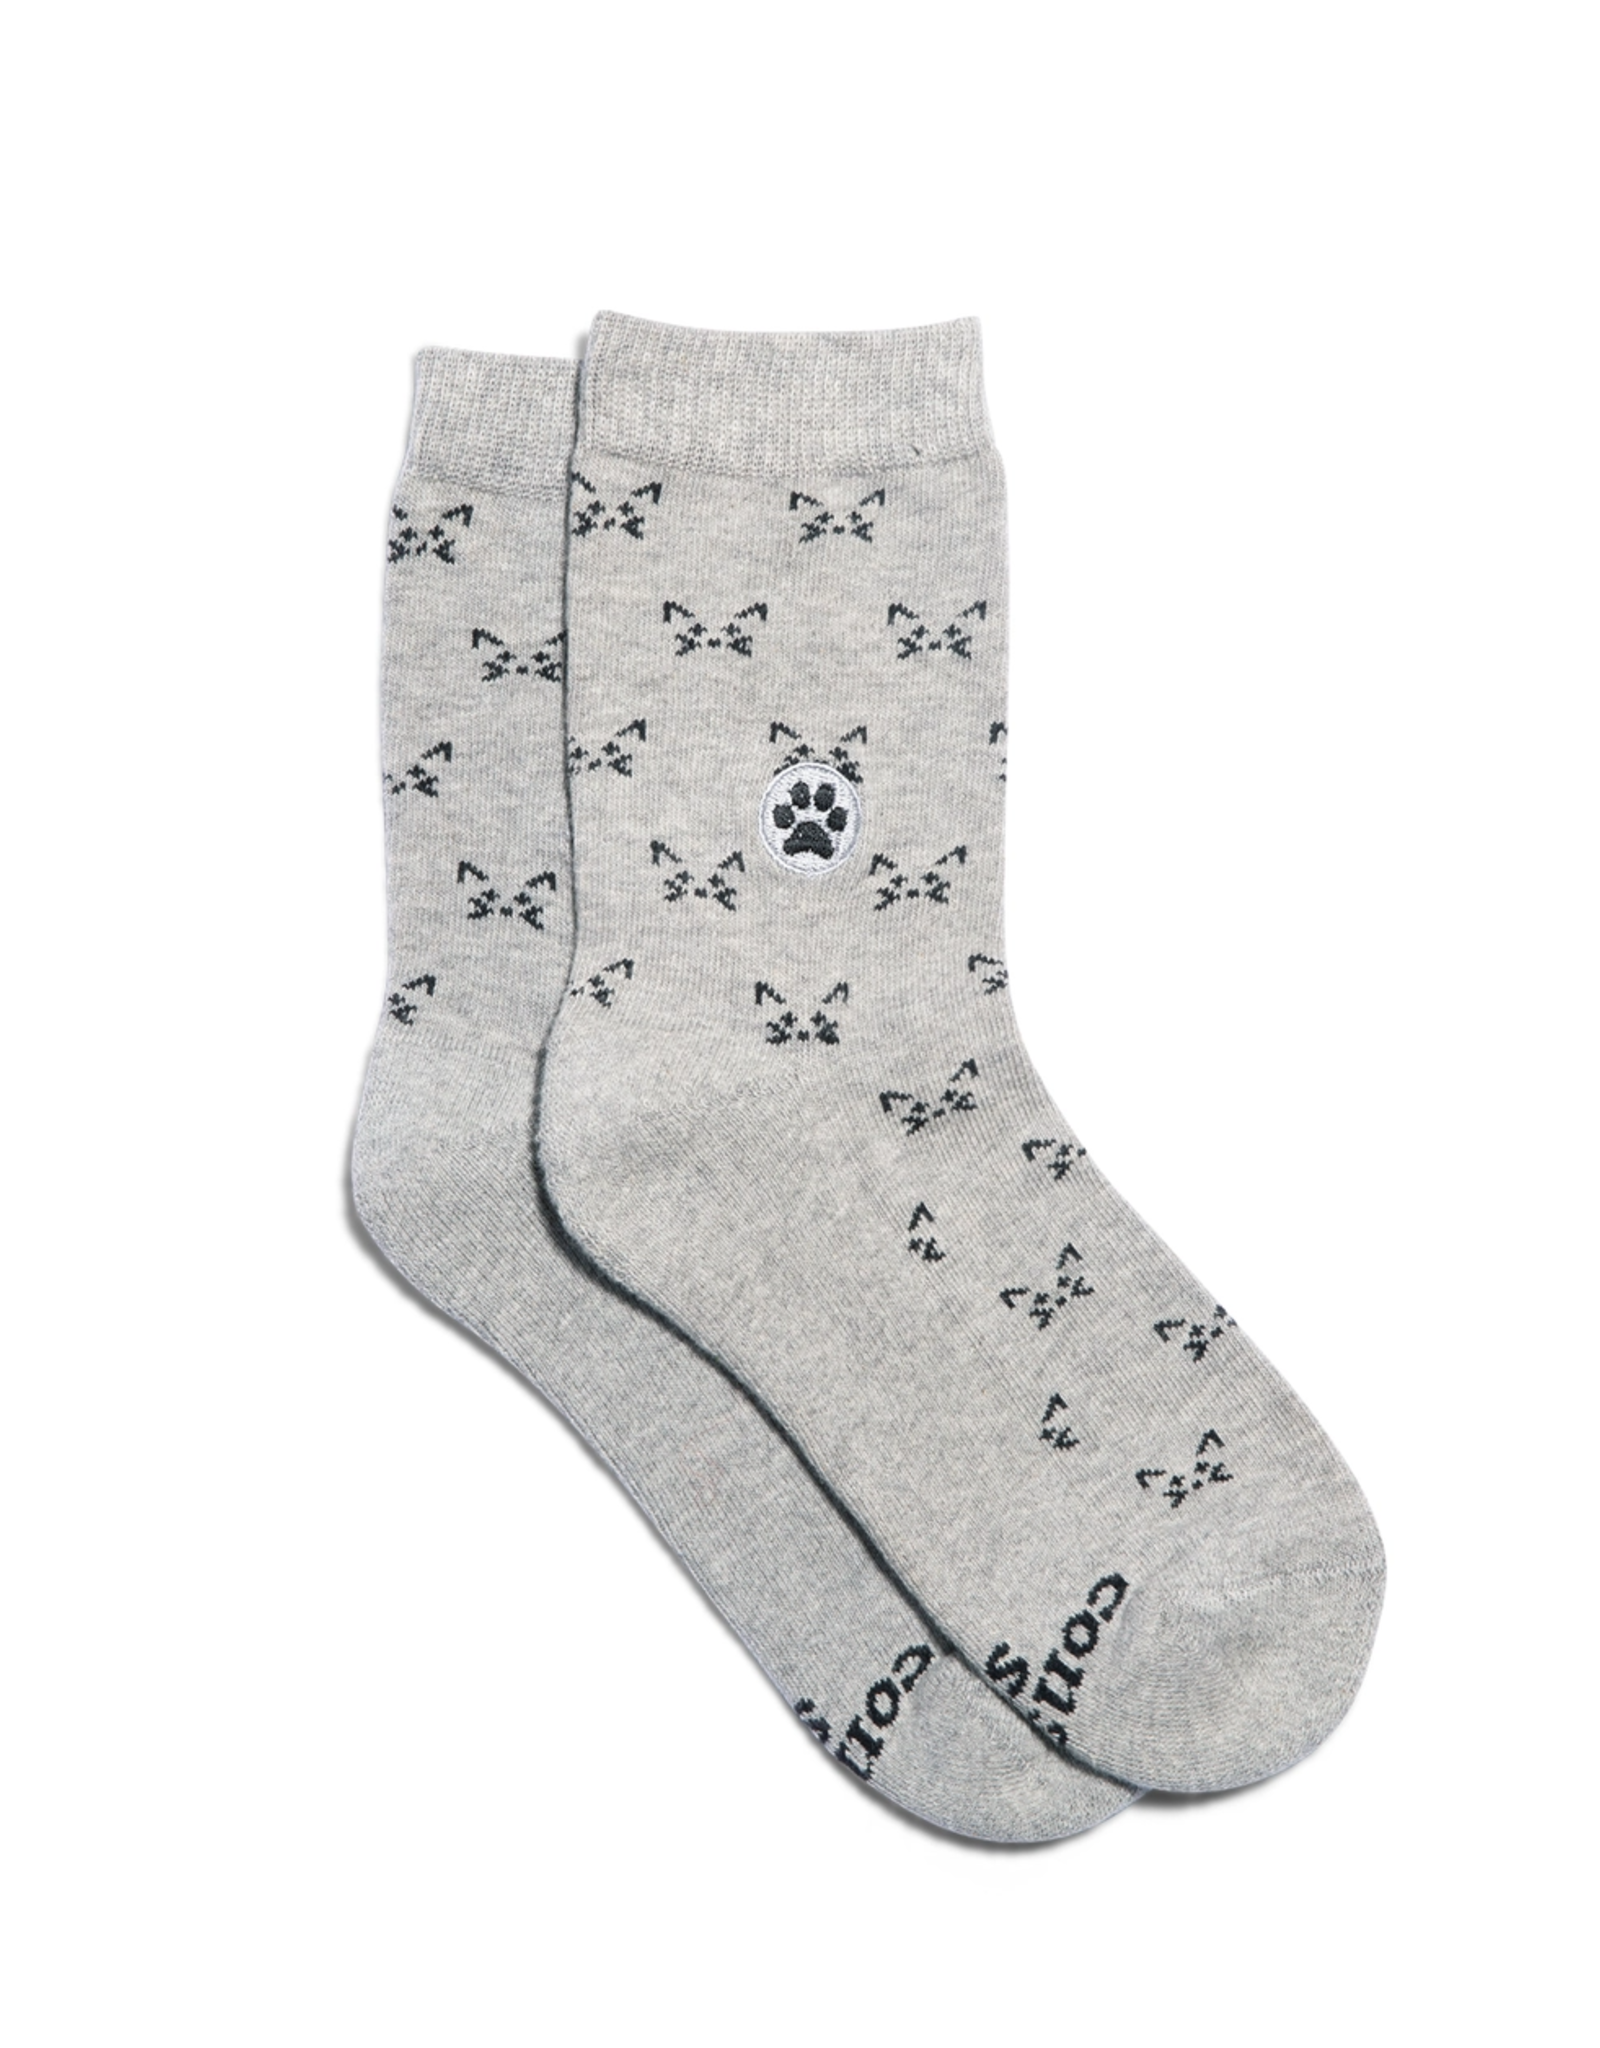 Conscious Step Children’s Socks That Save Cats